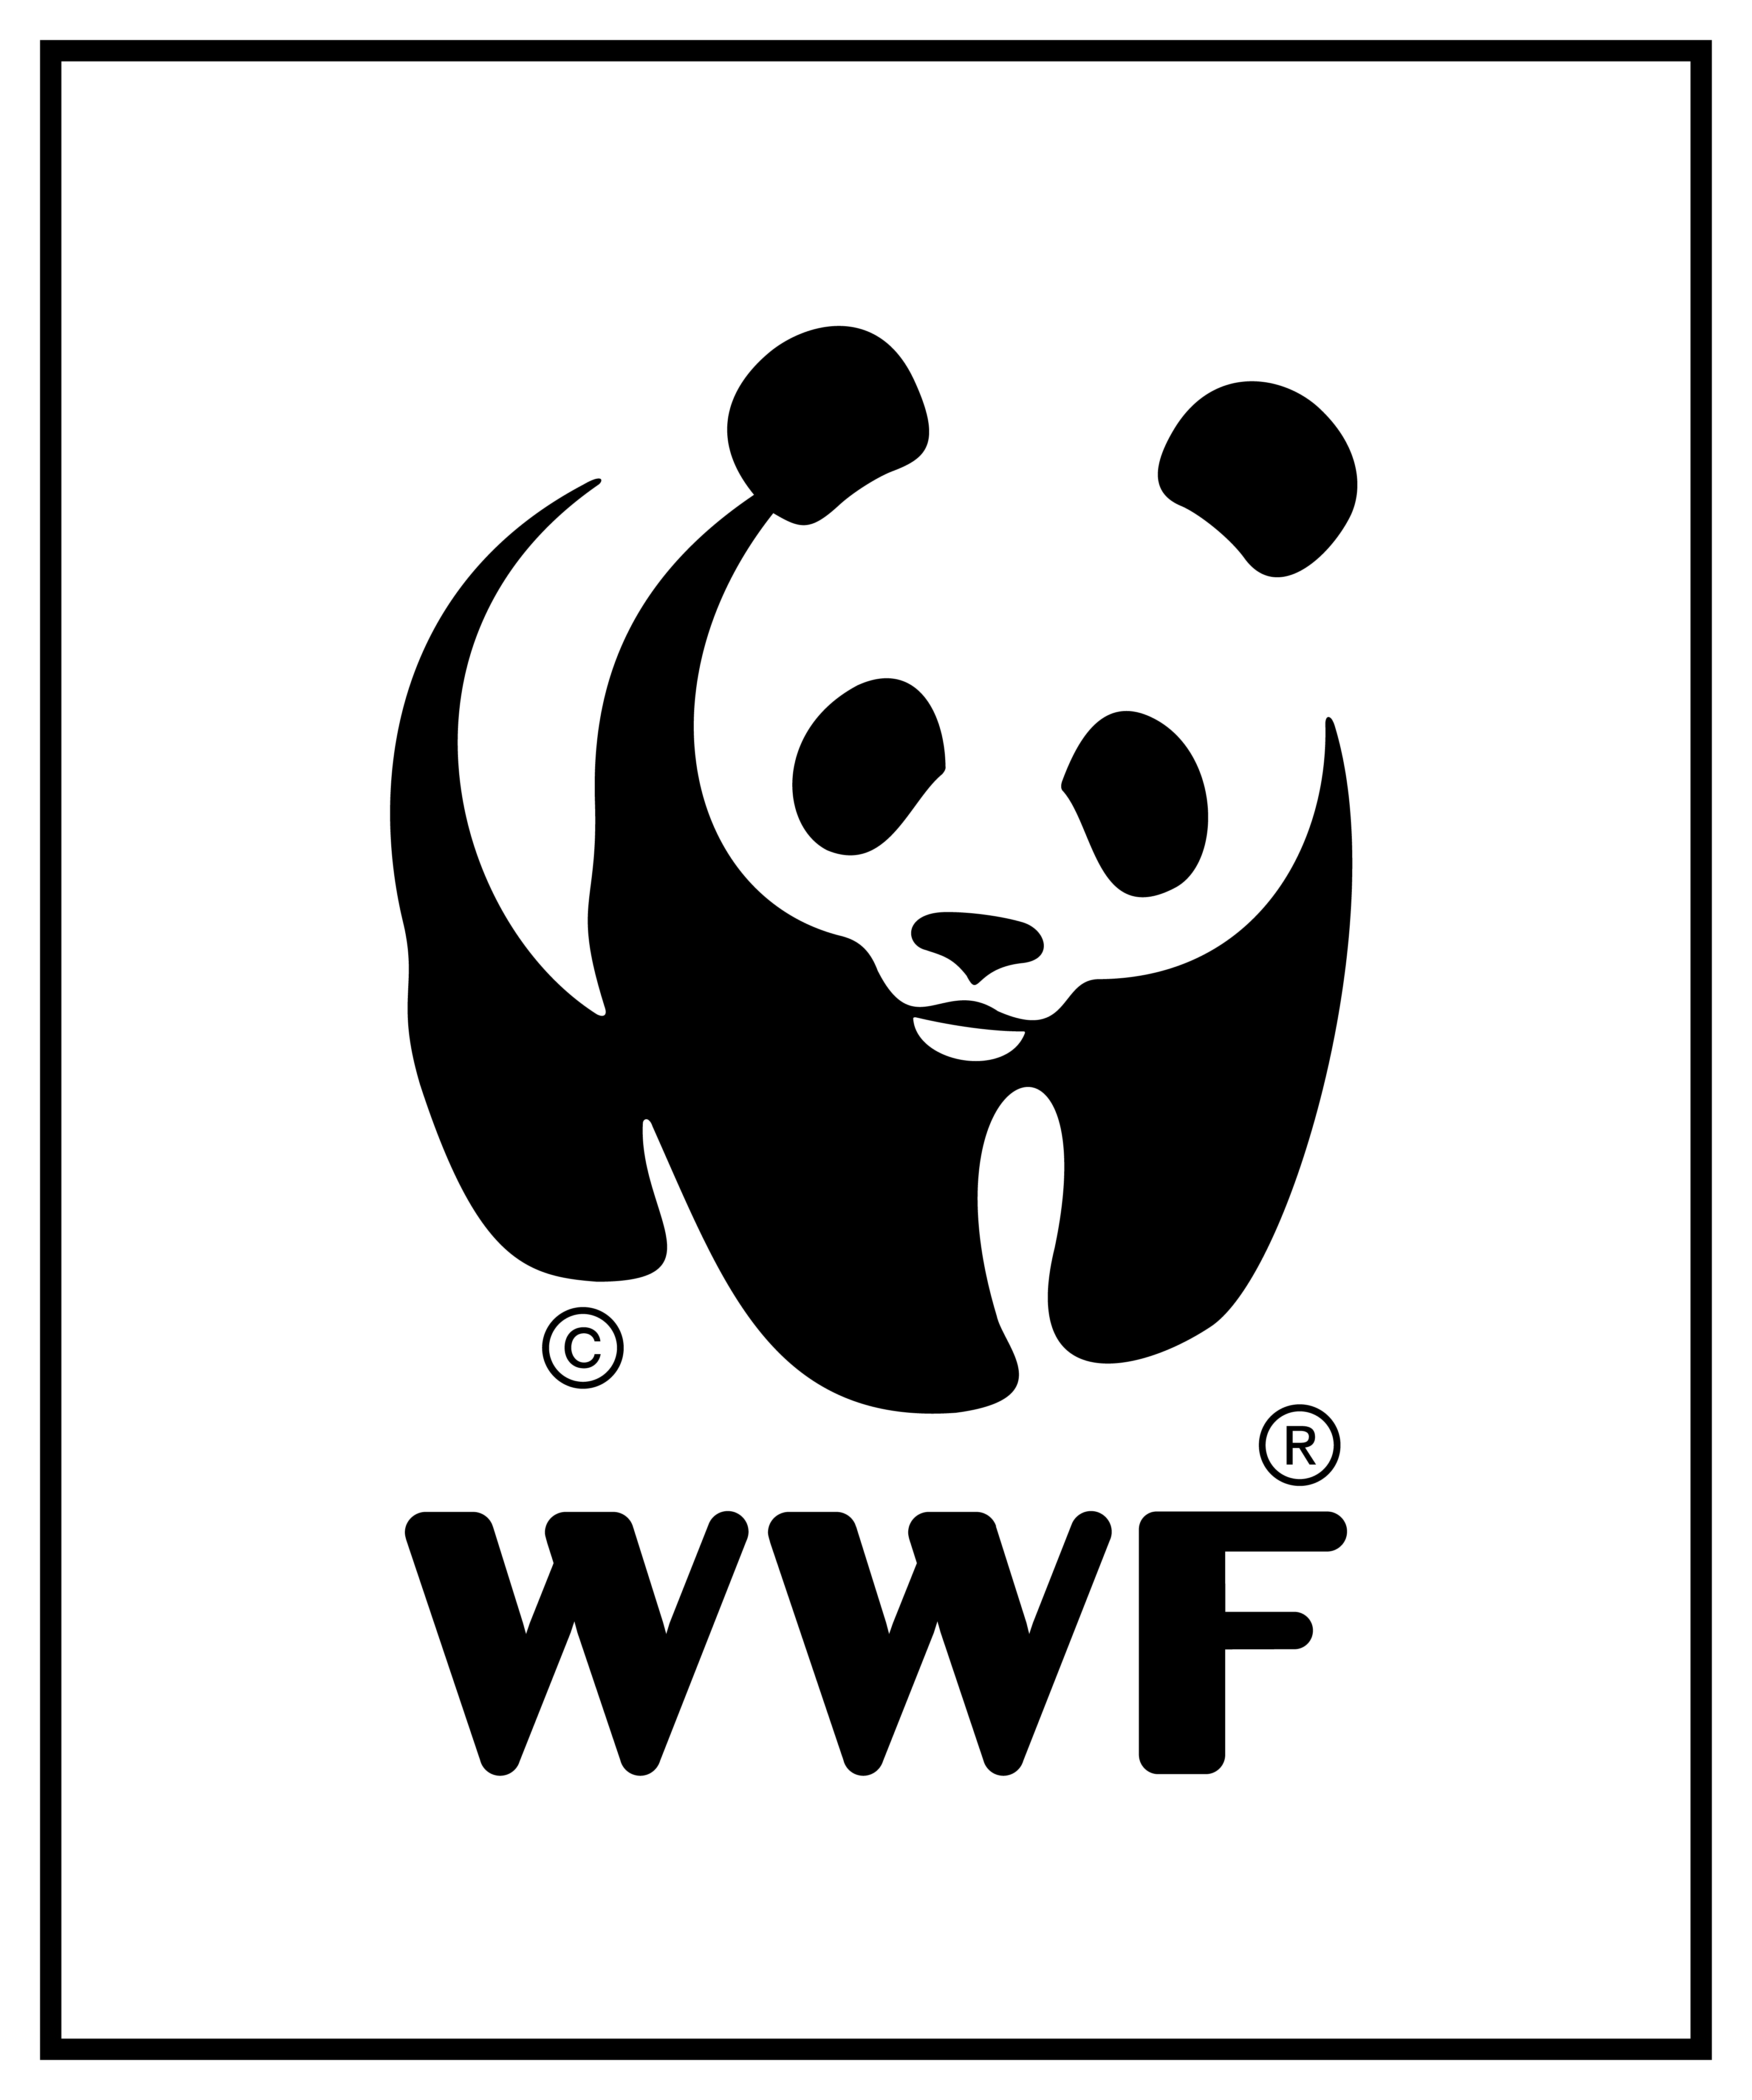 WWF Launches “Forest